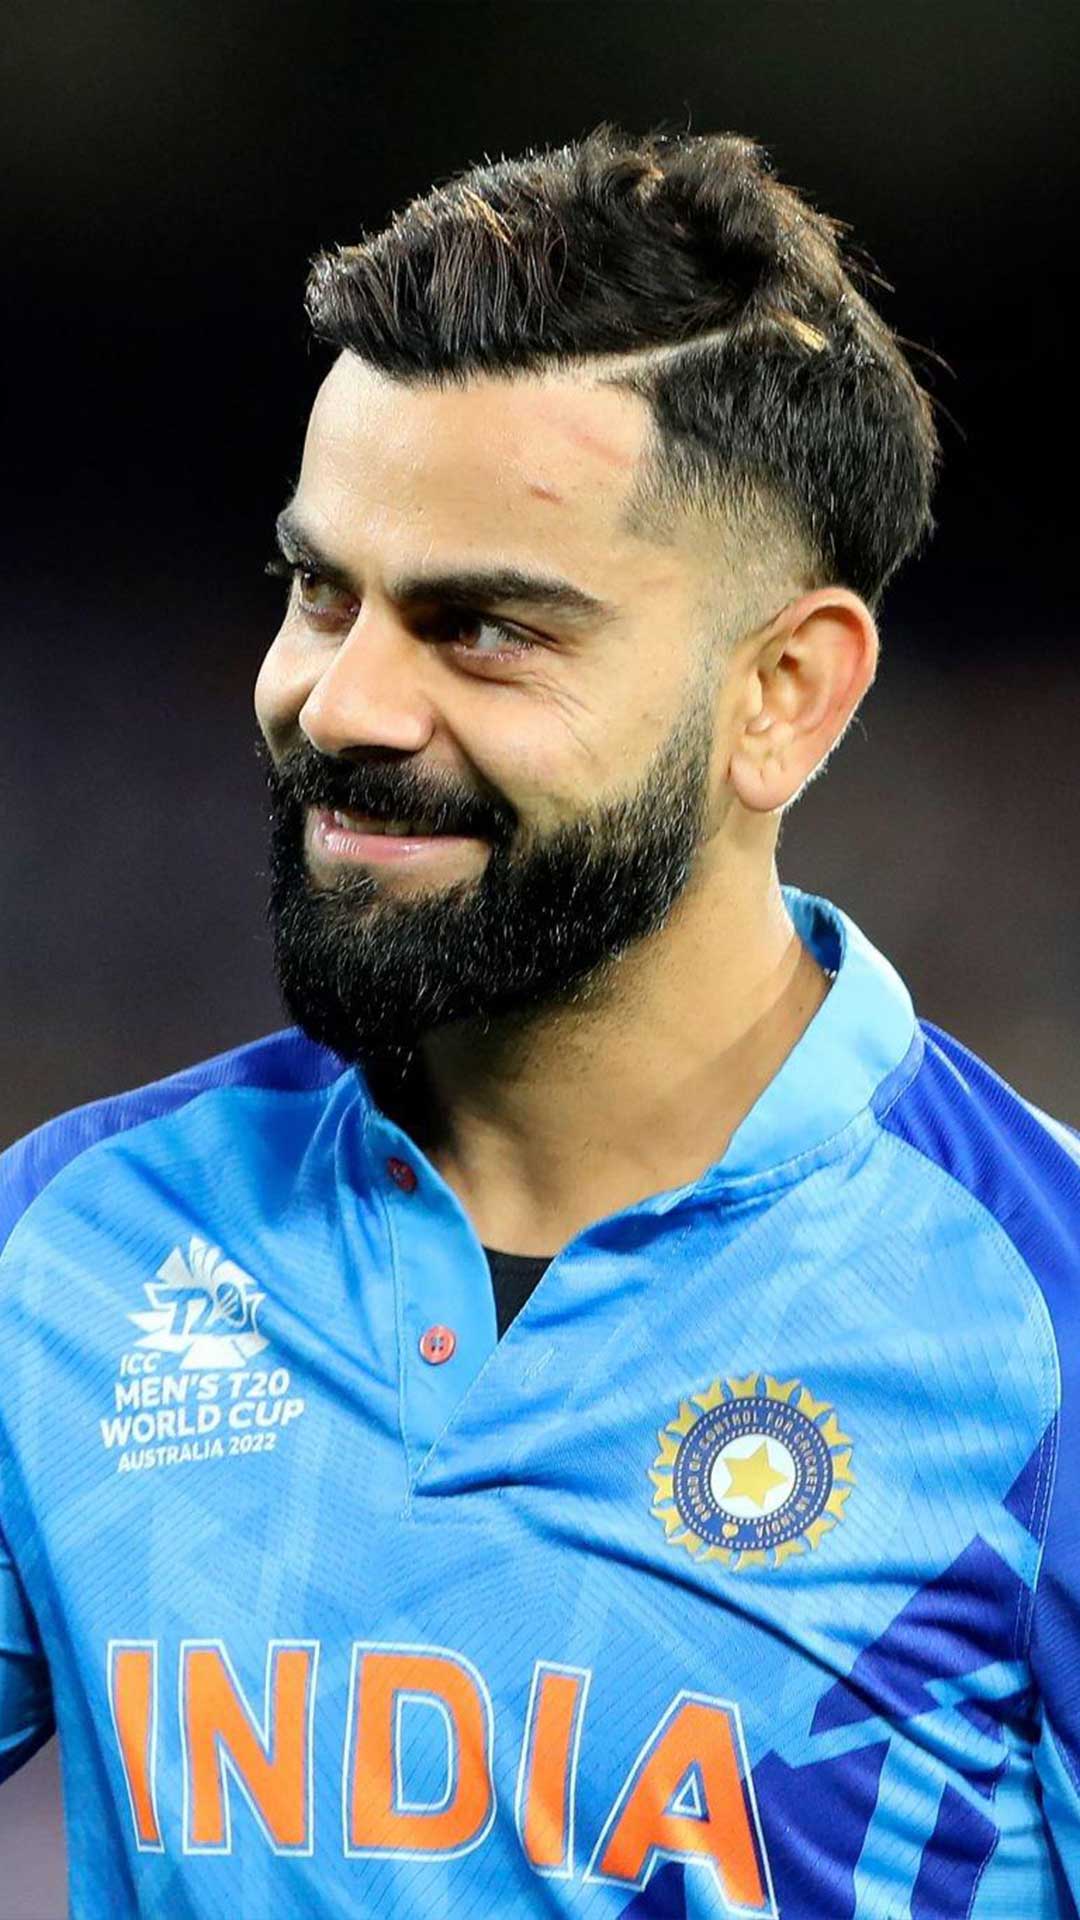 15 Facts Every Cricket Fan Should Know About Virat Kohli - ScoopWhoop